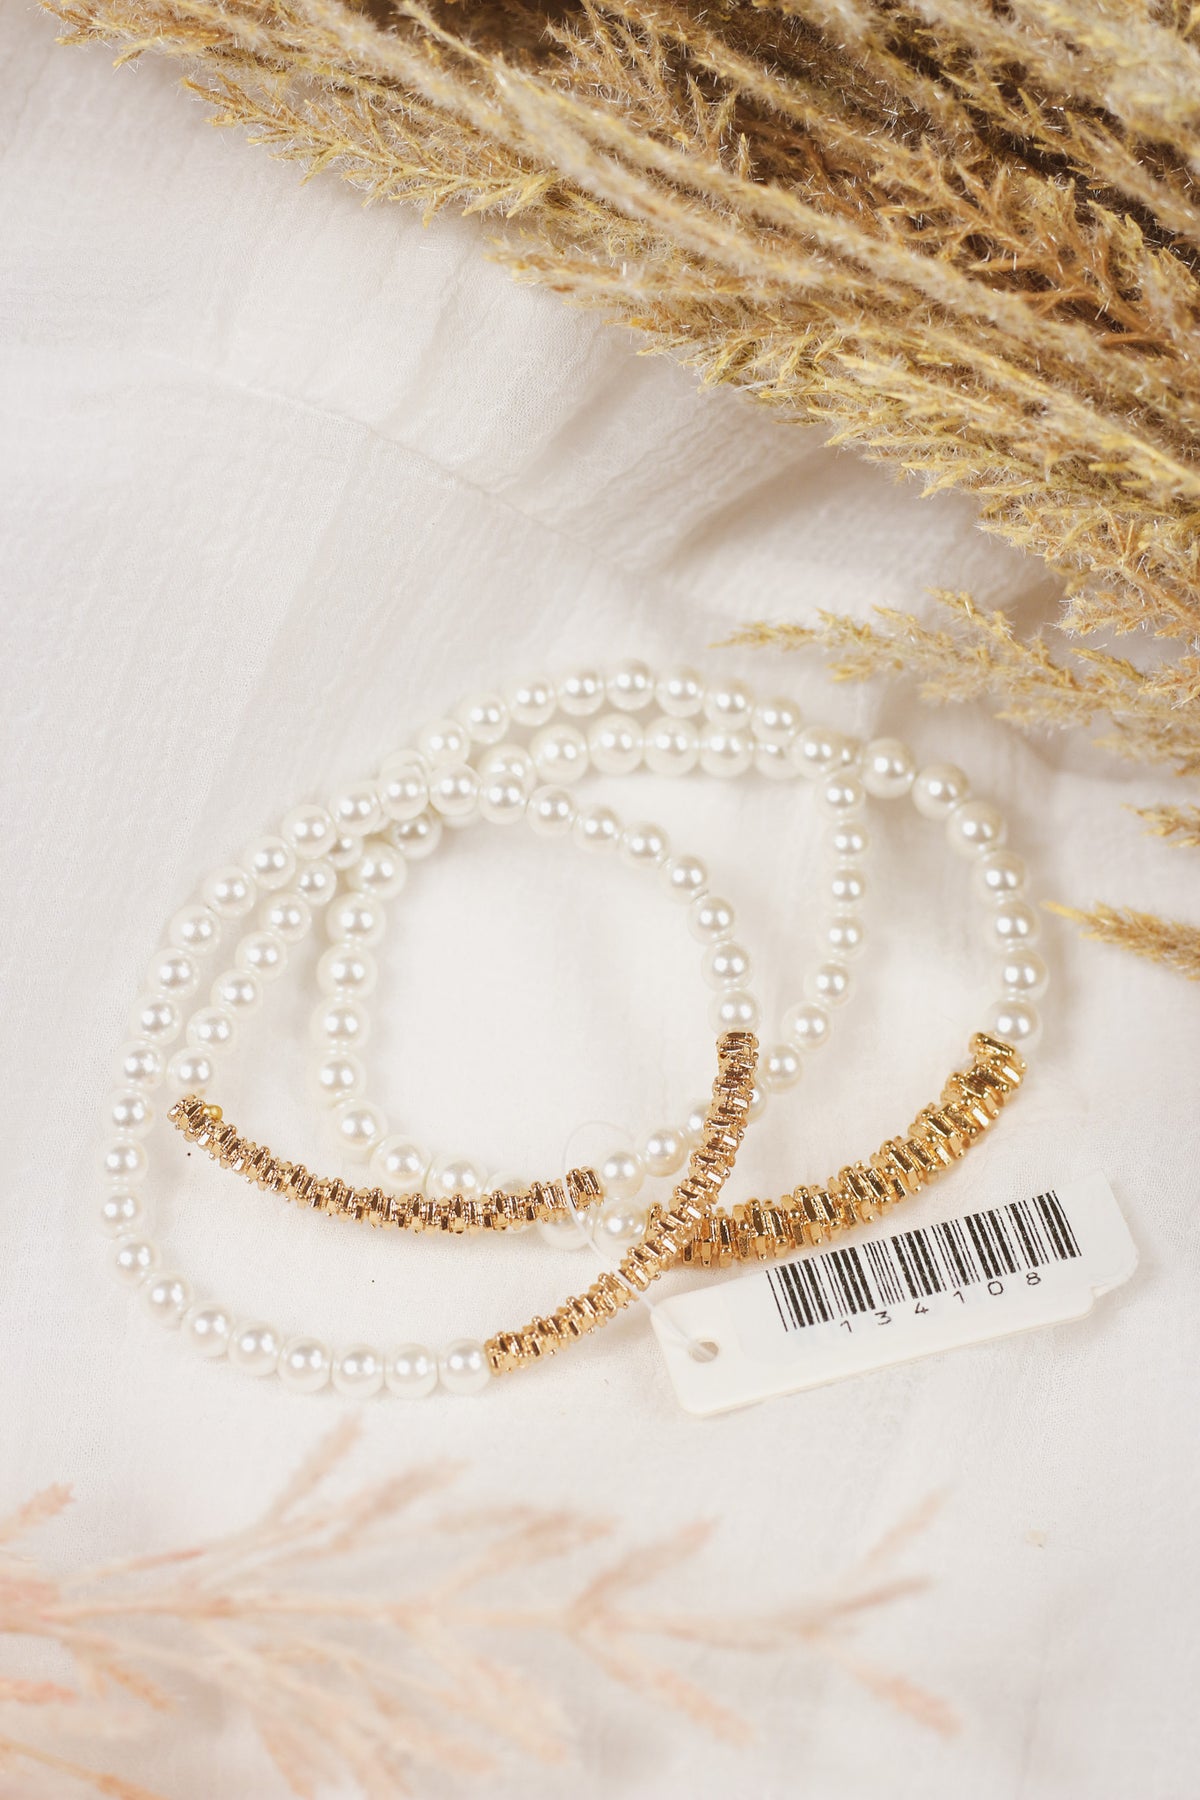 Pearl with Textured Gold Metal Beaded Bar Set of 3 Stretch Bracelets